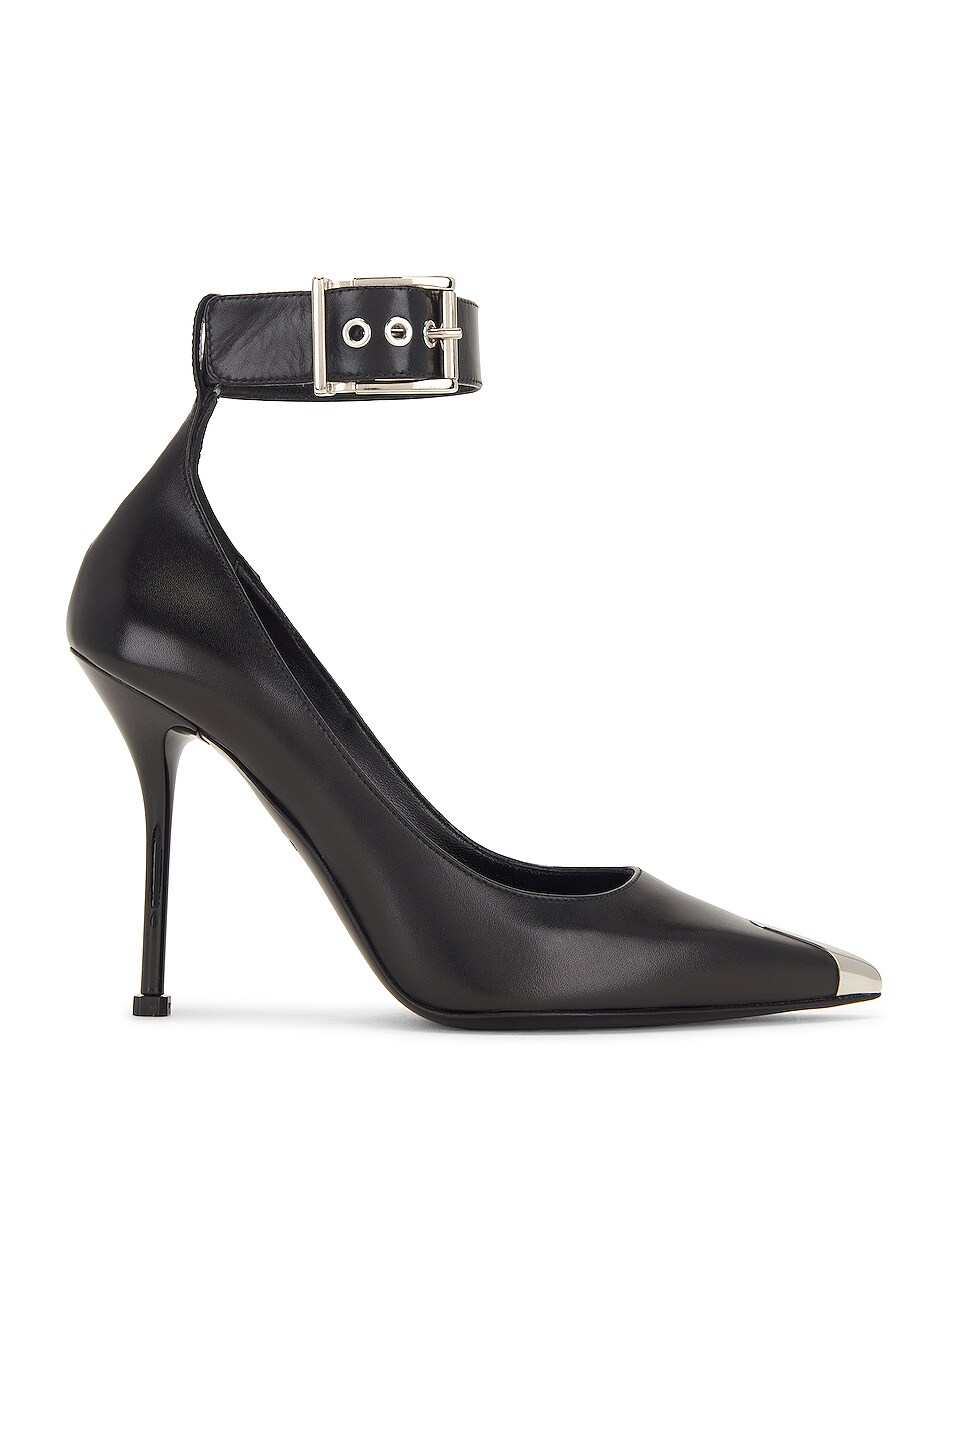 Image 1 of Alexander McQueen Boxcar Leather Heels in Black & Silver